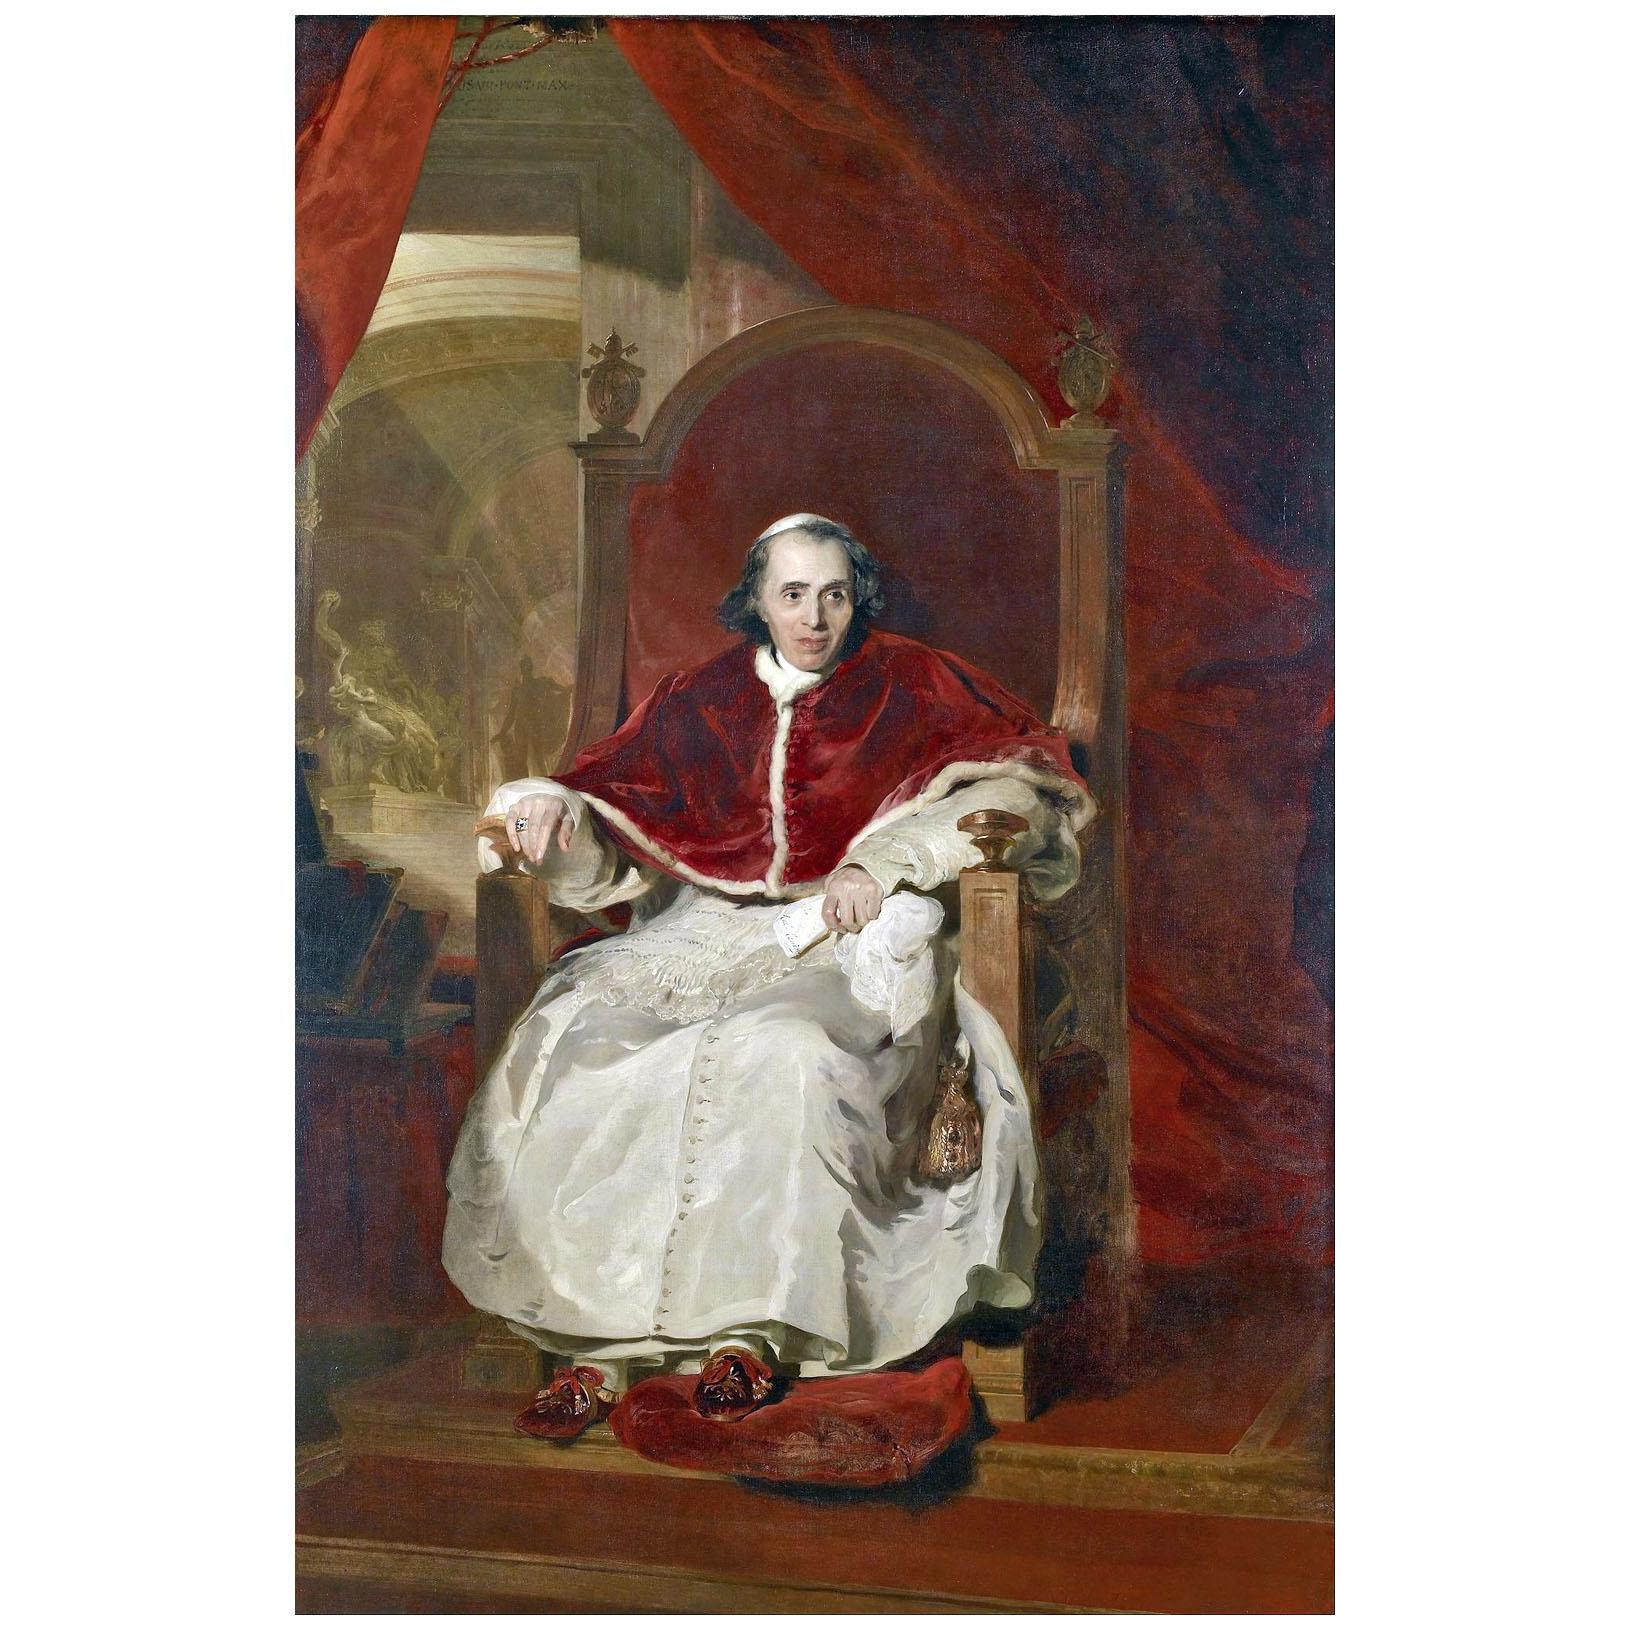 Thomas Lawrence. Pope Pius VII. 1819. Royal Collection London